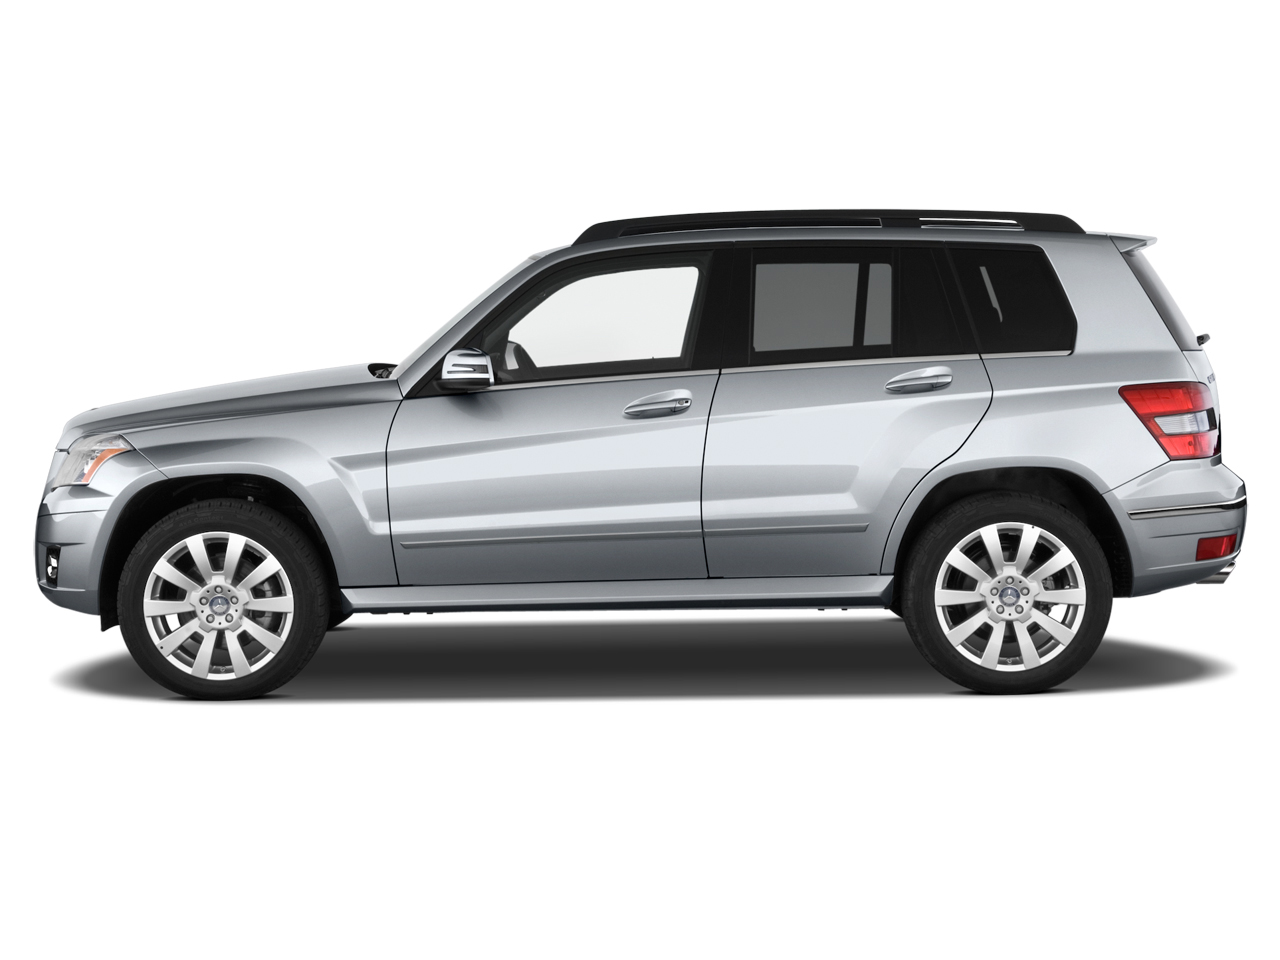 2012 Mercedes Benz Glk Class Review Ratings Specs Prices